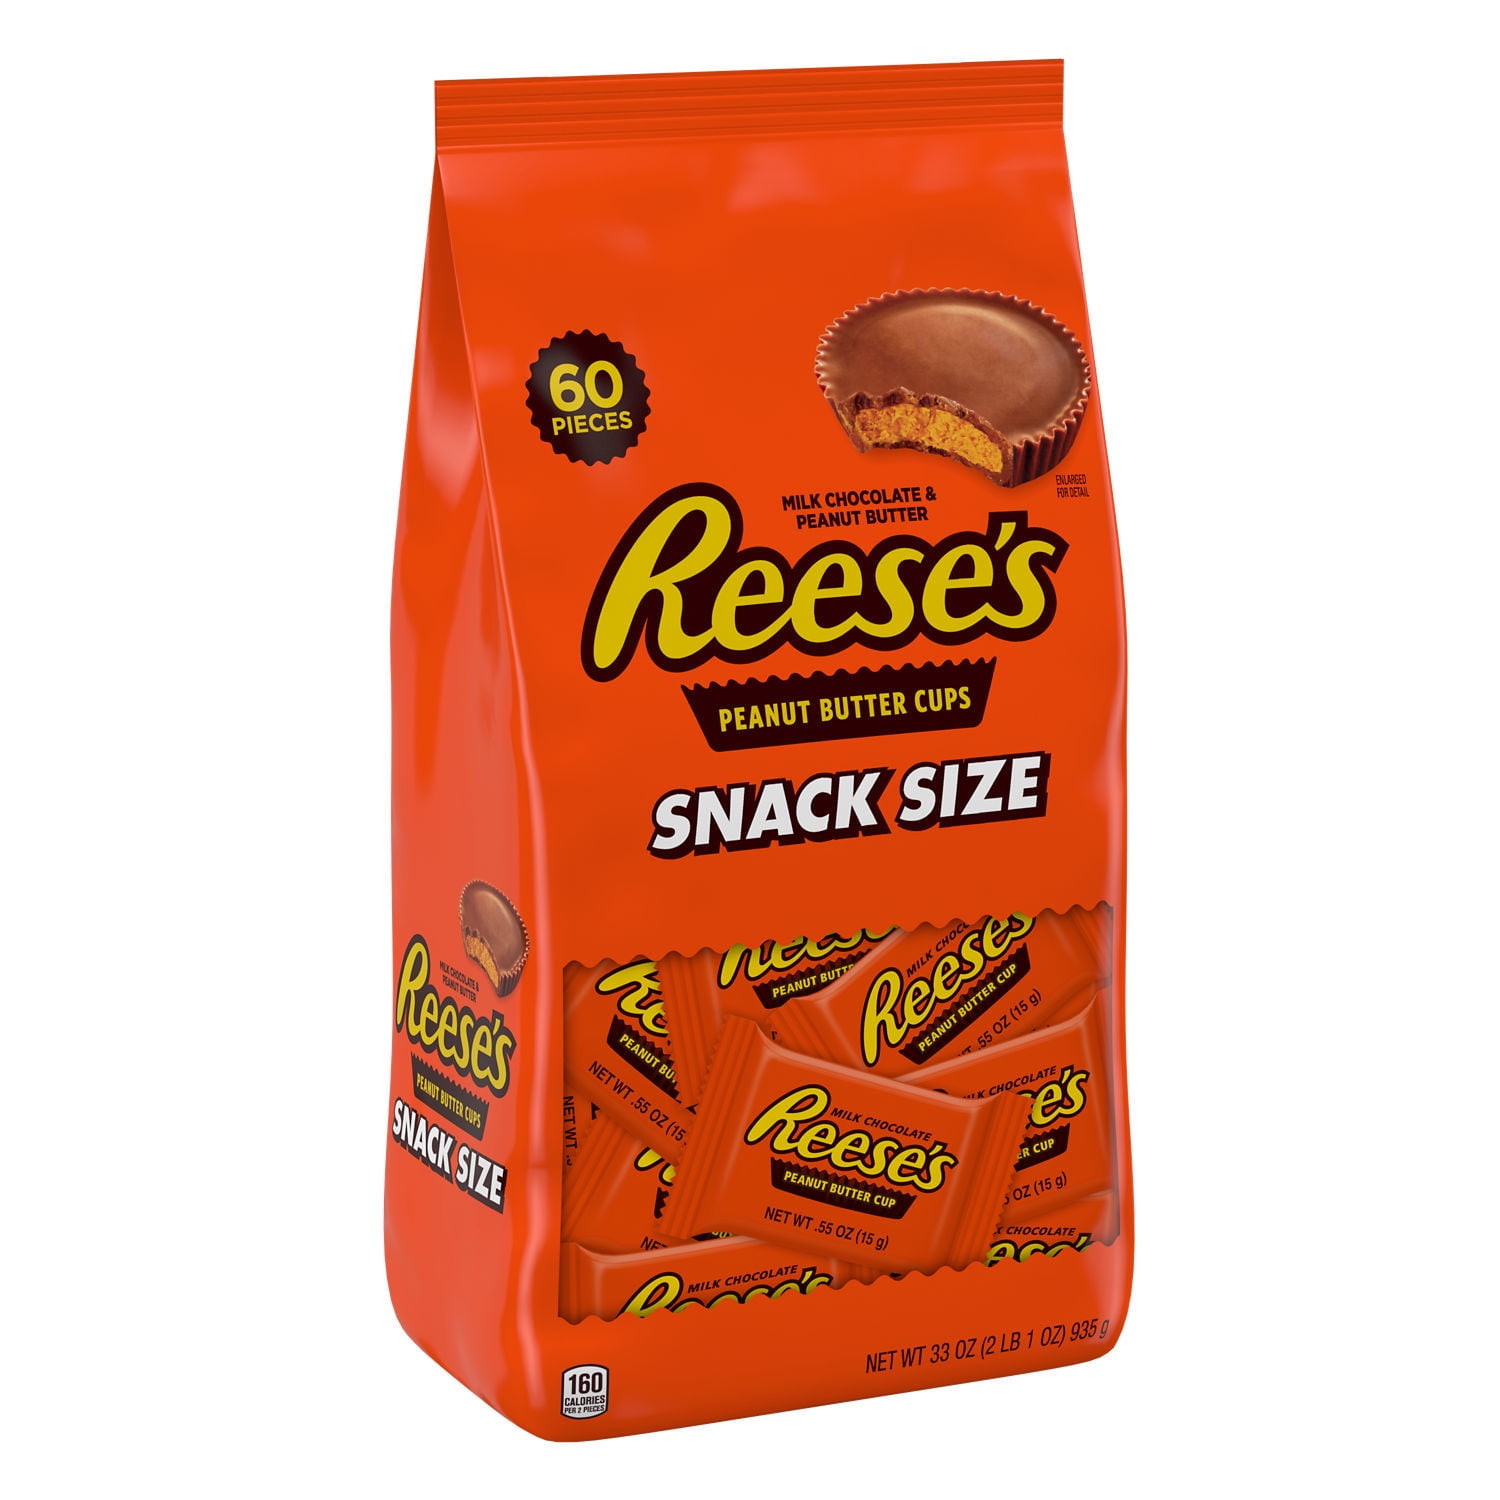 Reese's, Milk Chocolate Peanut Butter Snack Size Cups Candy, Gluten Free, Individually Wrapped, 33 oz, Bulk Bag (60 Pieces)